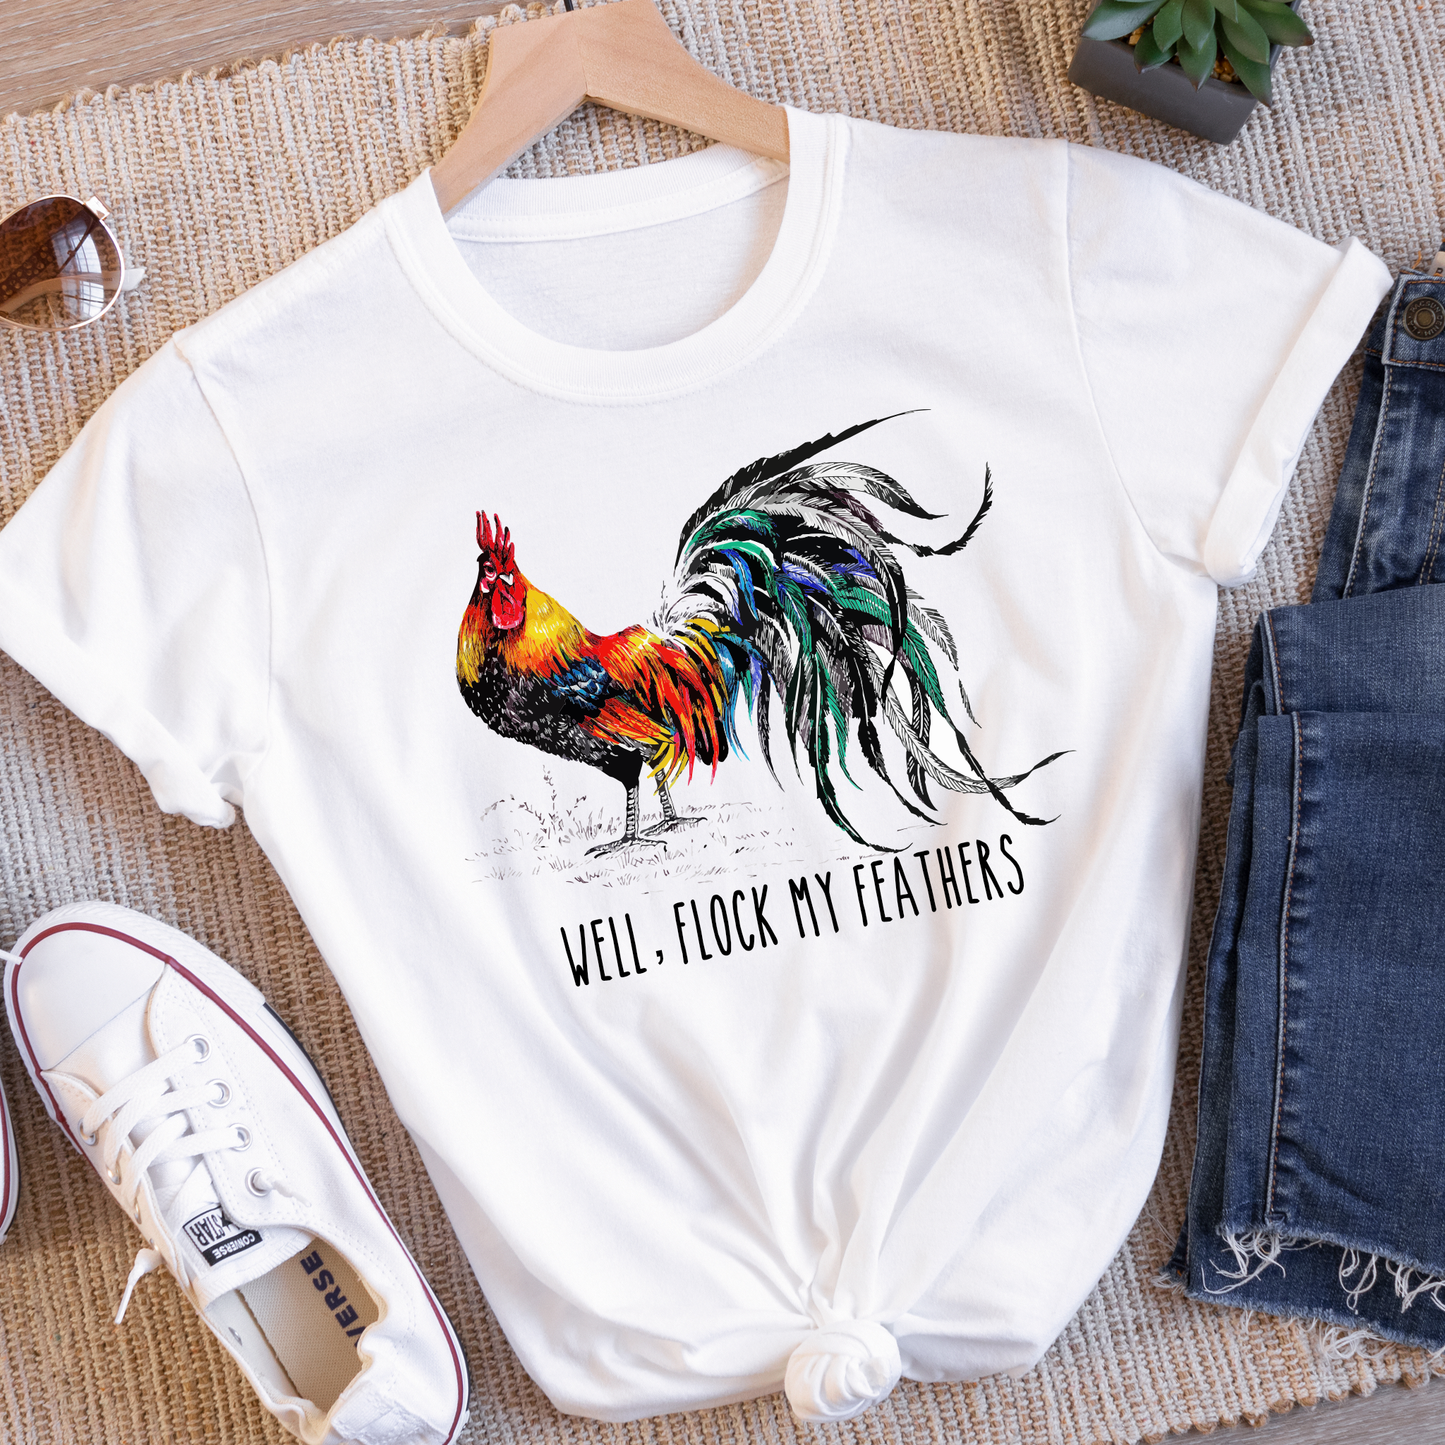 Well, Flock My Feathers - Rooster Tee